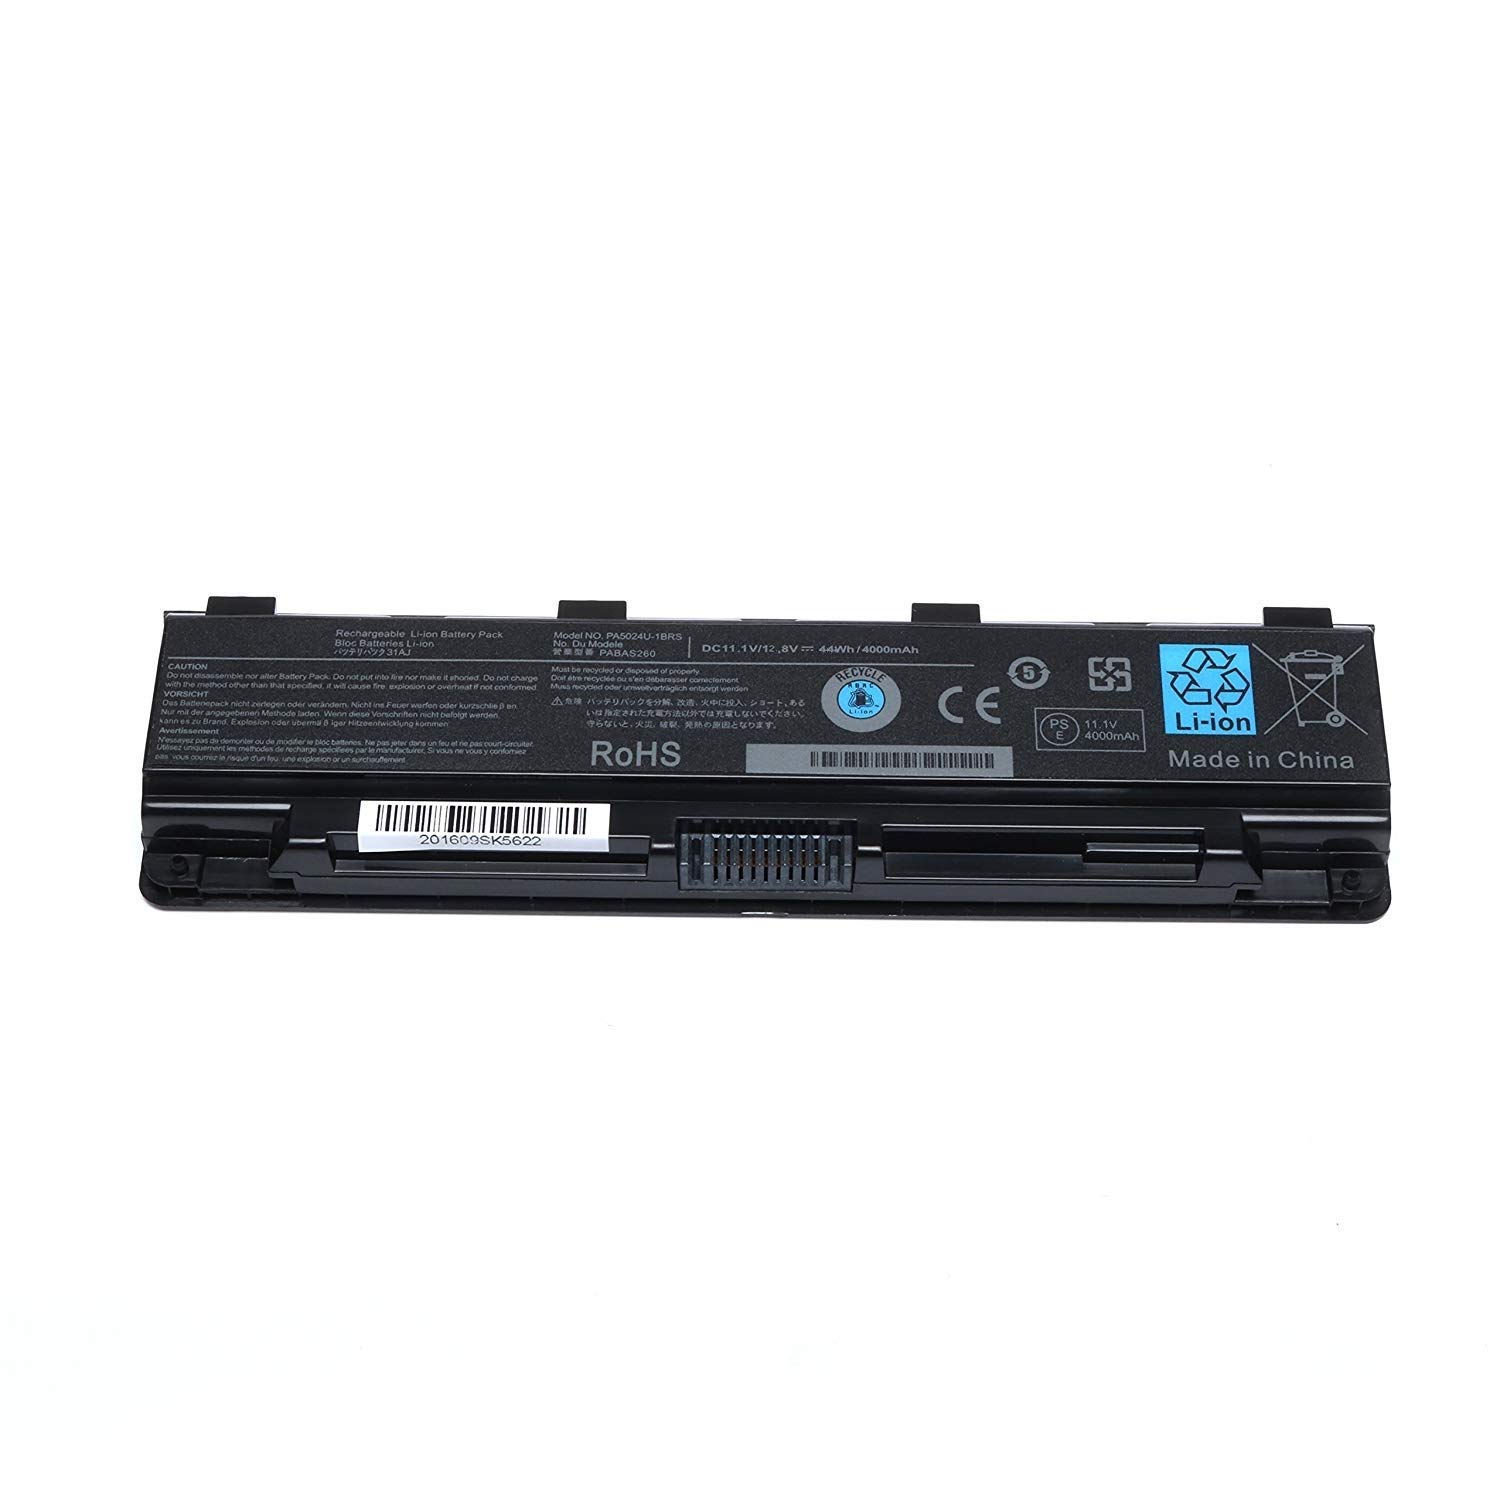 New Replacemnt Laptop Battery For Toshiba Satellite C850 in Deprime Solutions- PA5024U – Deprime Solutions ltd